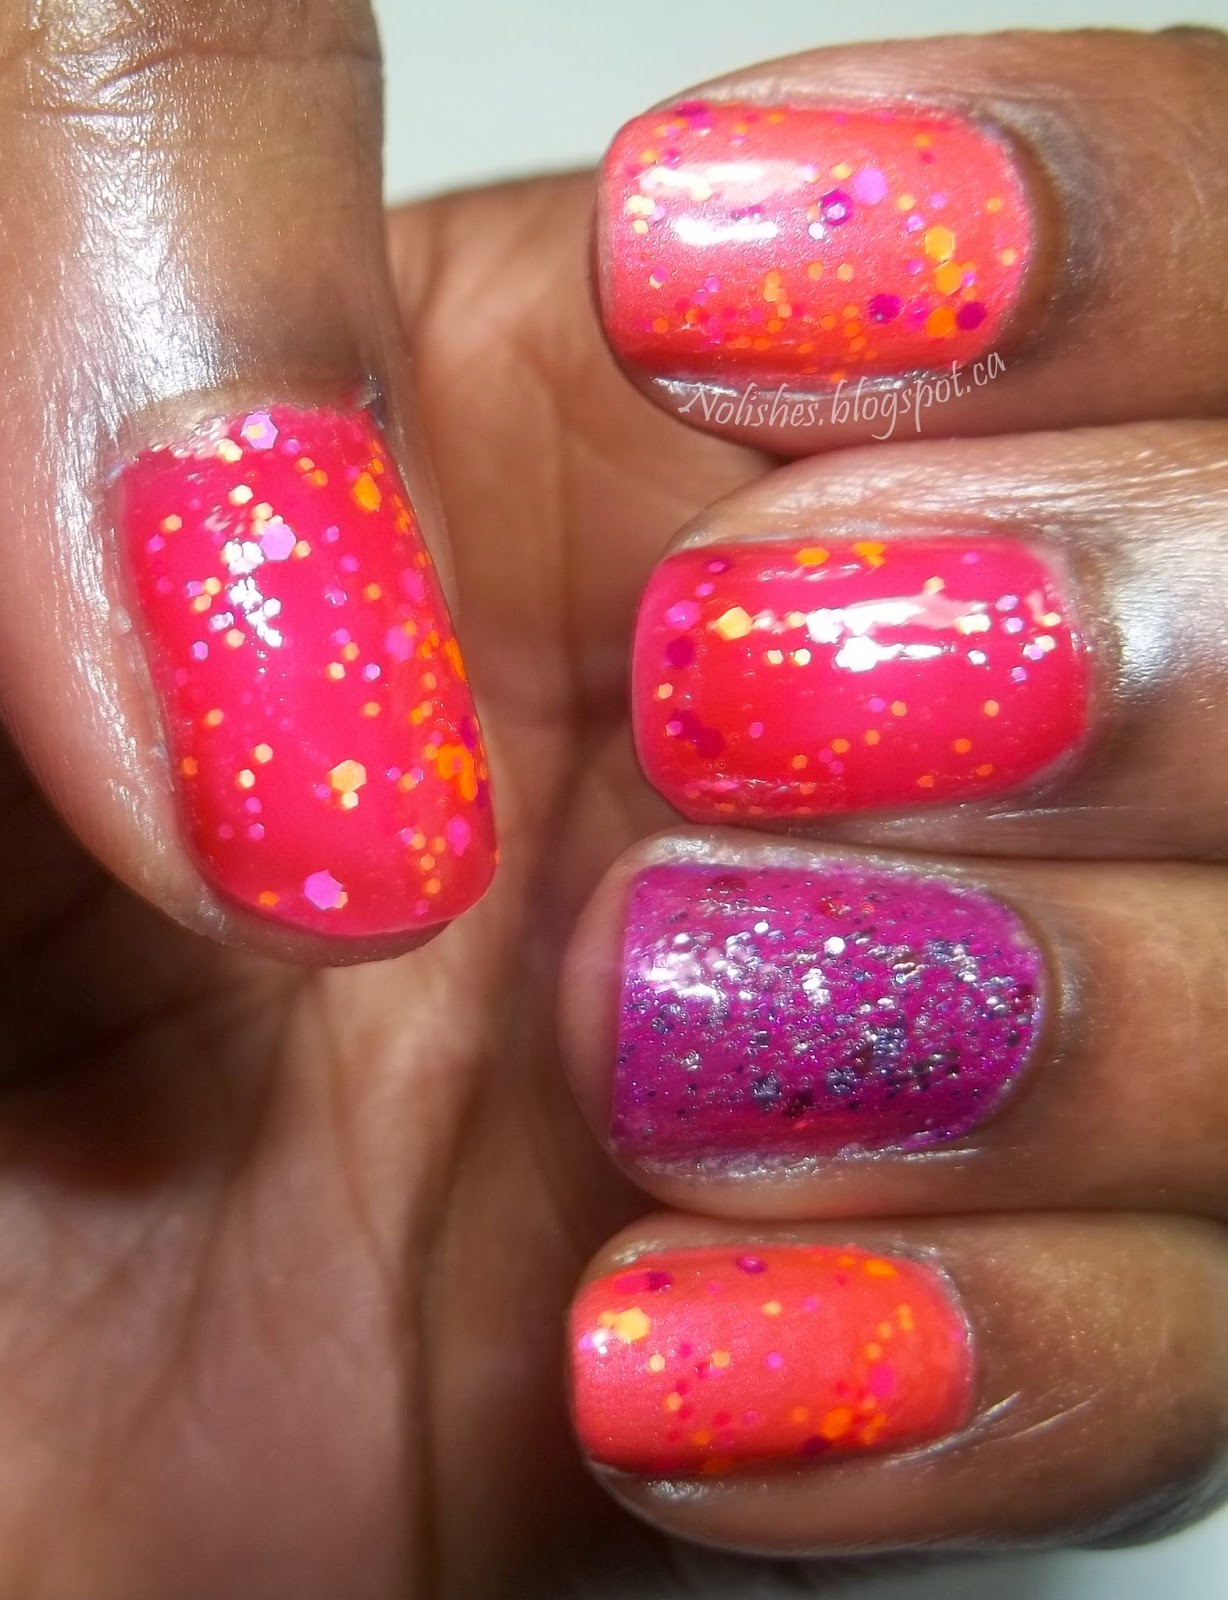 Skittles manicure with purple, fuchsia, and coral polishes covered in a purple, fuchsia,and orange glitter. Accent nail is covered with a traditional metallic glitter with lilac, pink, and plum tones.